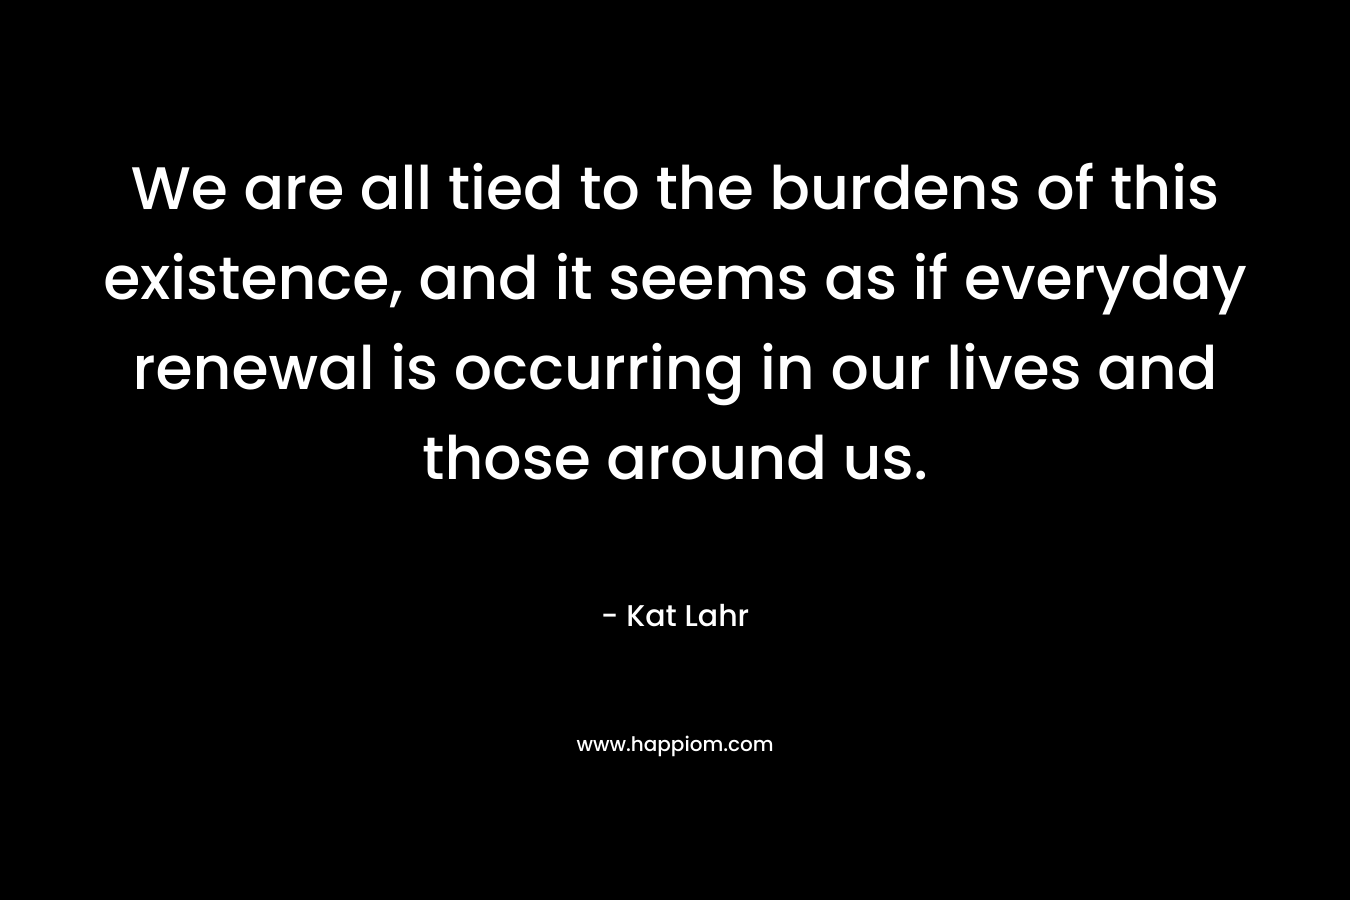 We are all tied to the burdens of this existence, and it seems as if everyday renewal is occurring in our lives and those around us. – Kat Lahr